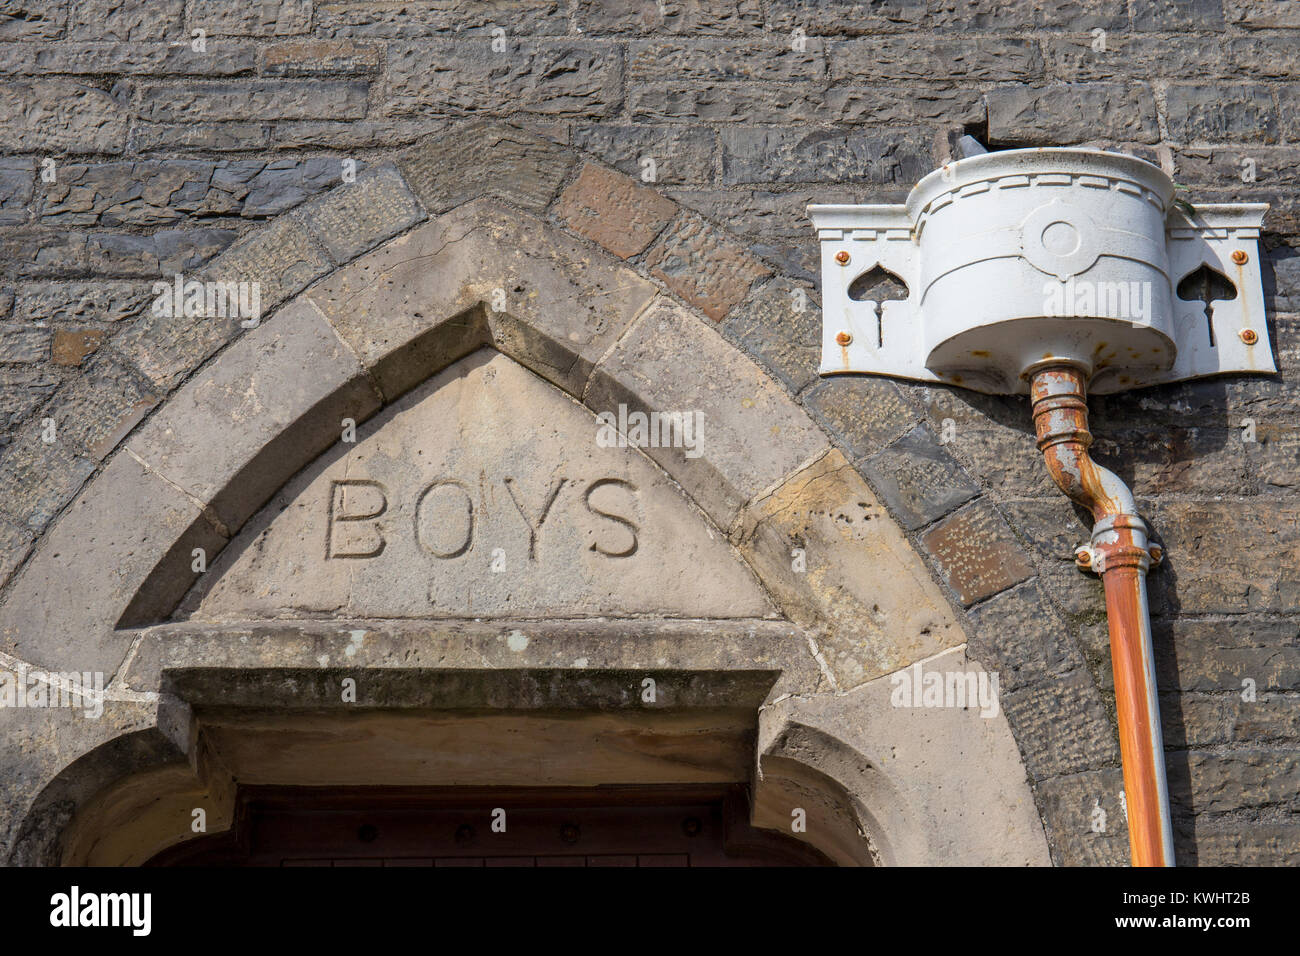 Boys school sign above entrance with downpipe Stock Photo